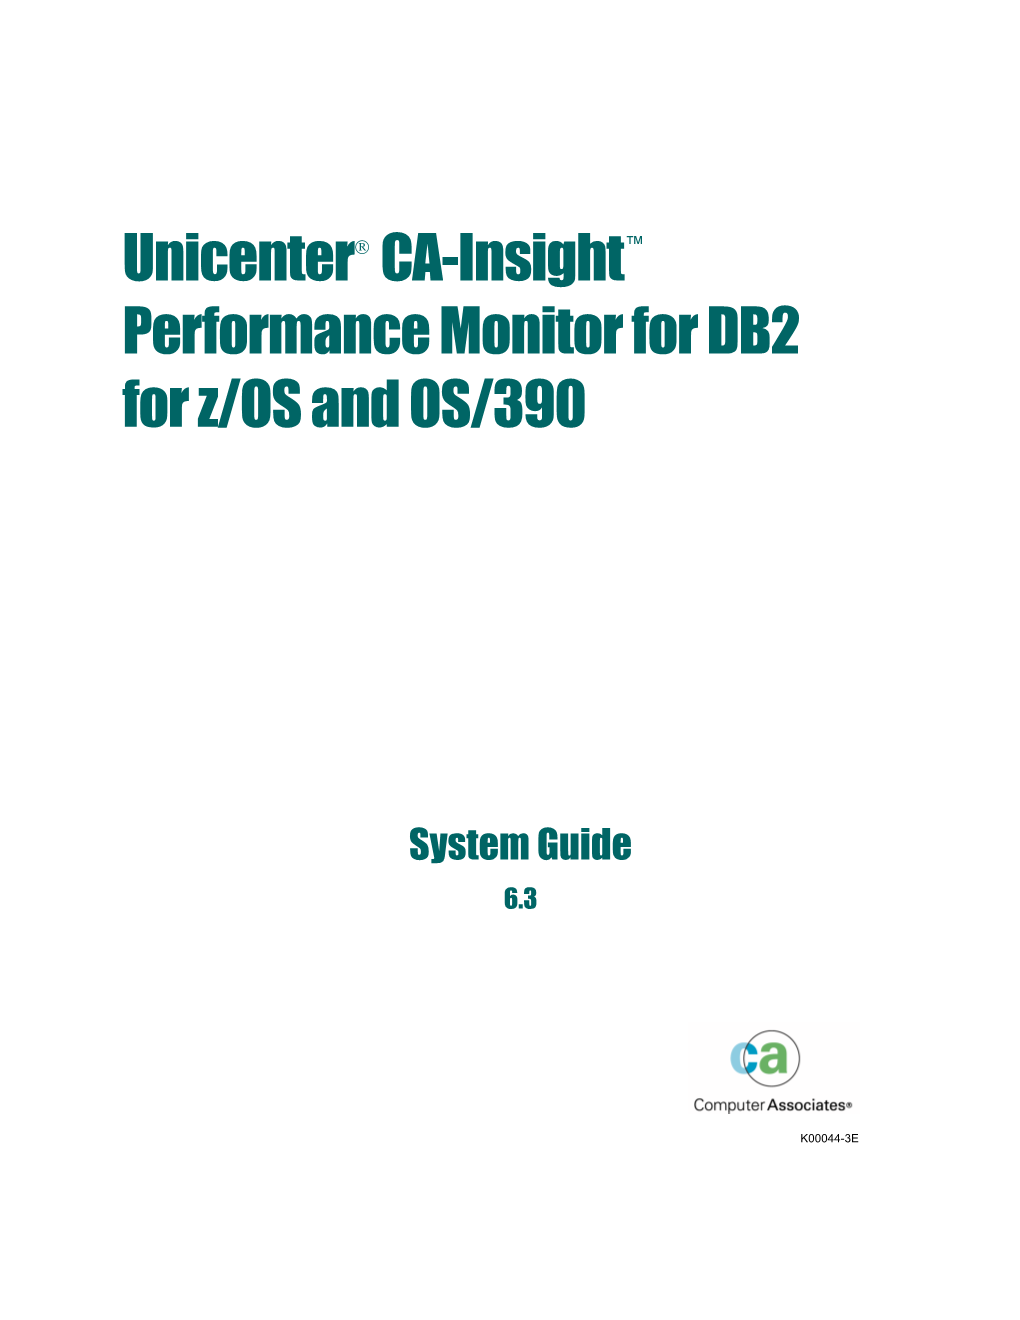 Unicenter CA-Insight Performance Monitor for DB2 for Z/OS and OS/390 Concepts and Facilities